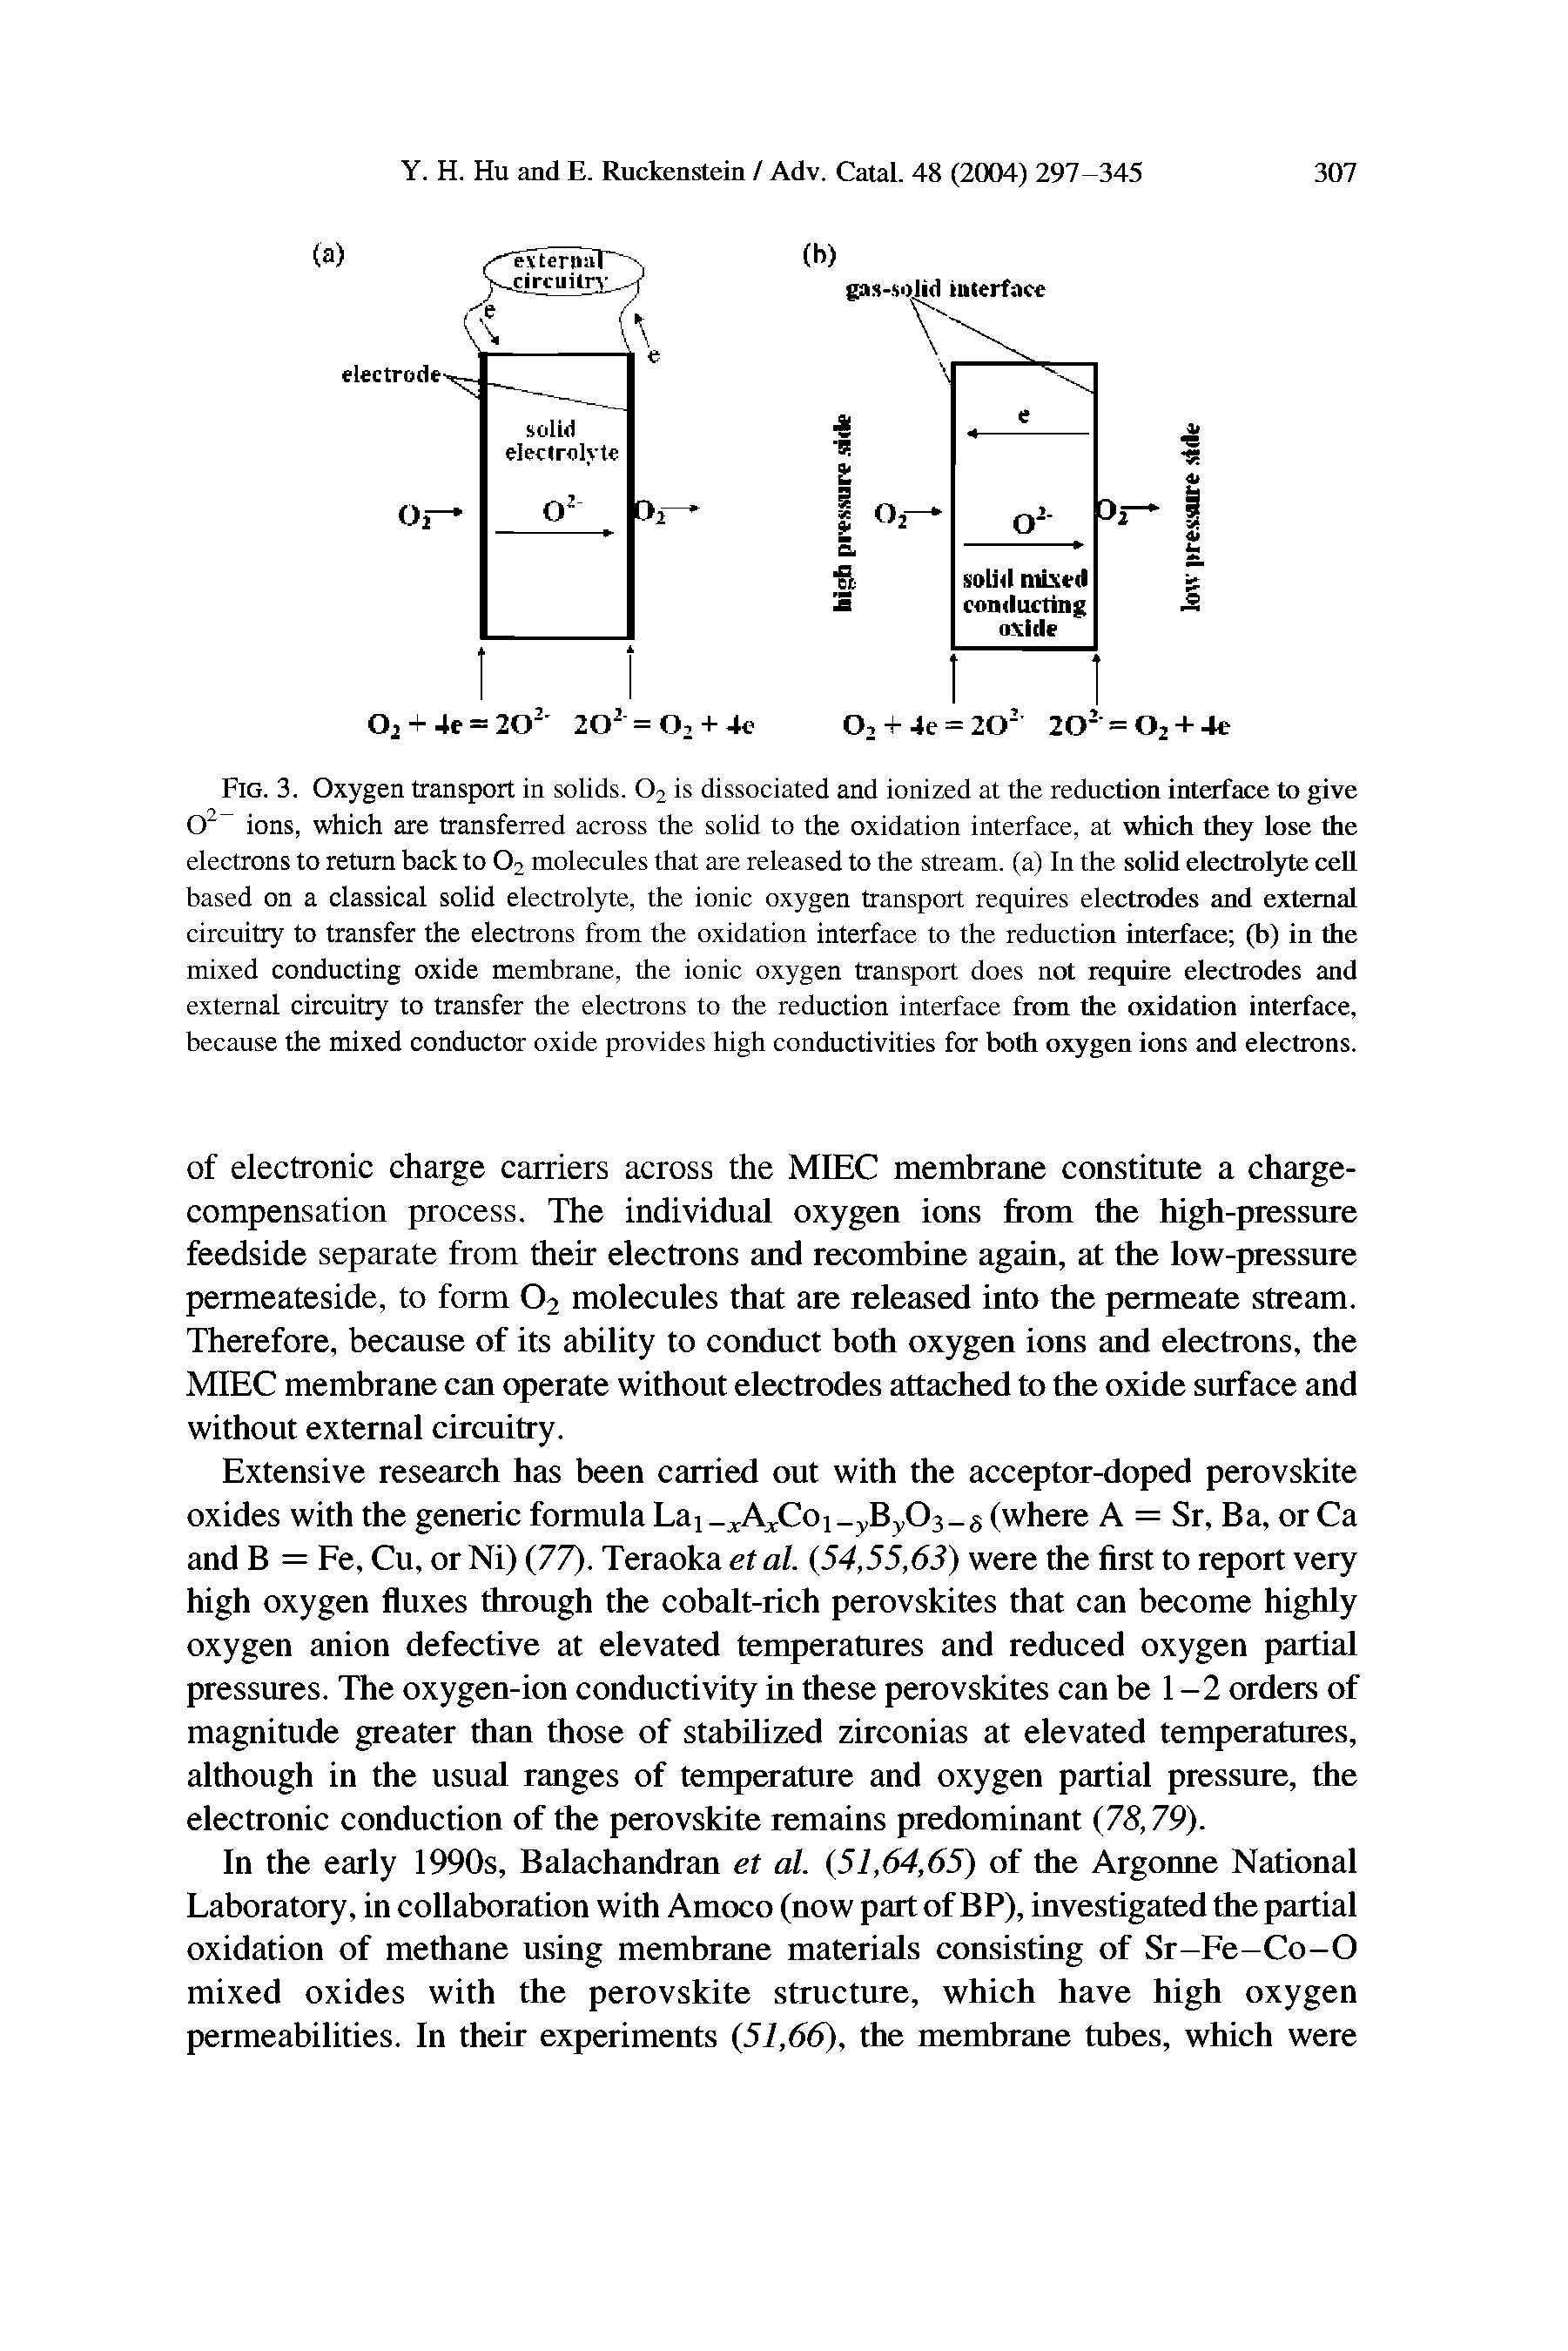 Fig. 3. Oxygen transport in solids. 02 is dissociated and ionized at the reduction interface to give O2 ions, which are transferred across the solid to the oxidation interface, at which they lose the electrons to return back to 02 molecules that are released to the stream, (a) In the solid electrolyte cell based on a classical solid electrolyte, the ionic oxygen transport requires electrodes and external circuitry to transfer the electrons from the oxidation interface to the reduction interface (b) in the mixed conducting oxide membrane, the ionic oxygen transport does not require electrodes and external circuitry to transfer the electrons to the reduction interface from the oxidation interface, because the mixed conductor oxide provides high conductivities for both oxygen ions and electrons.